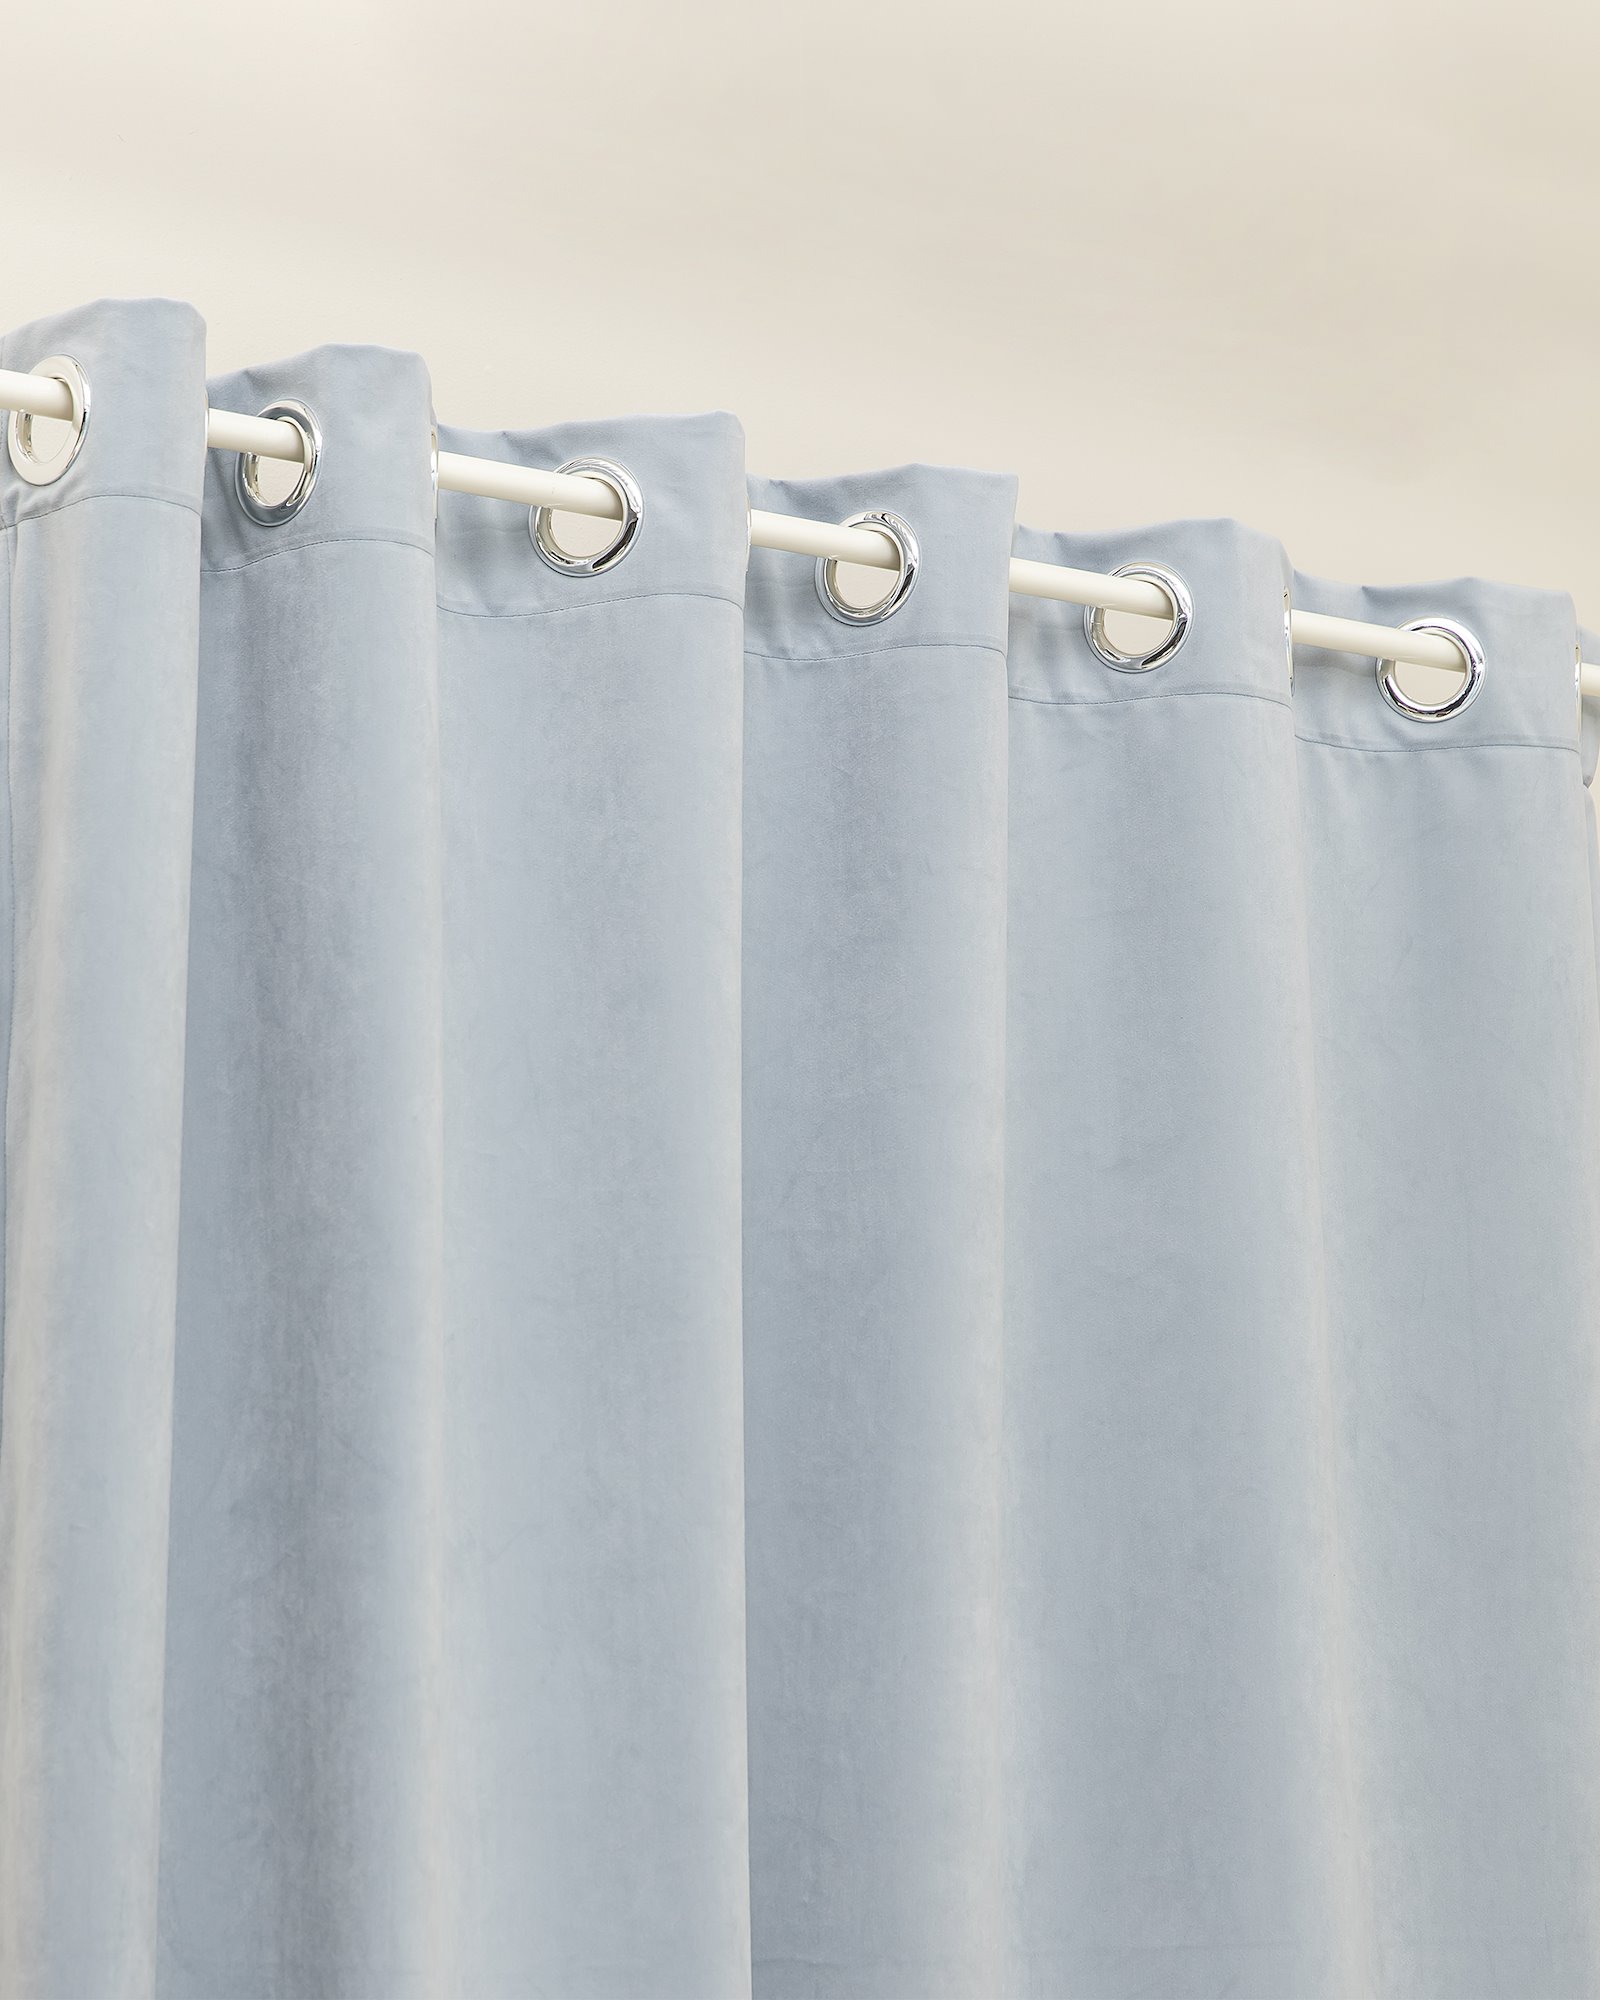 Sew-it-yourself: Curtain with eyelets DIY8048_image.jpg